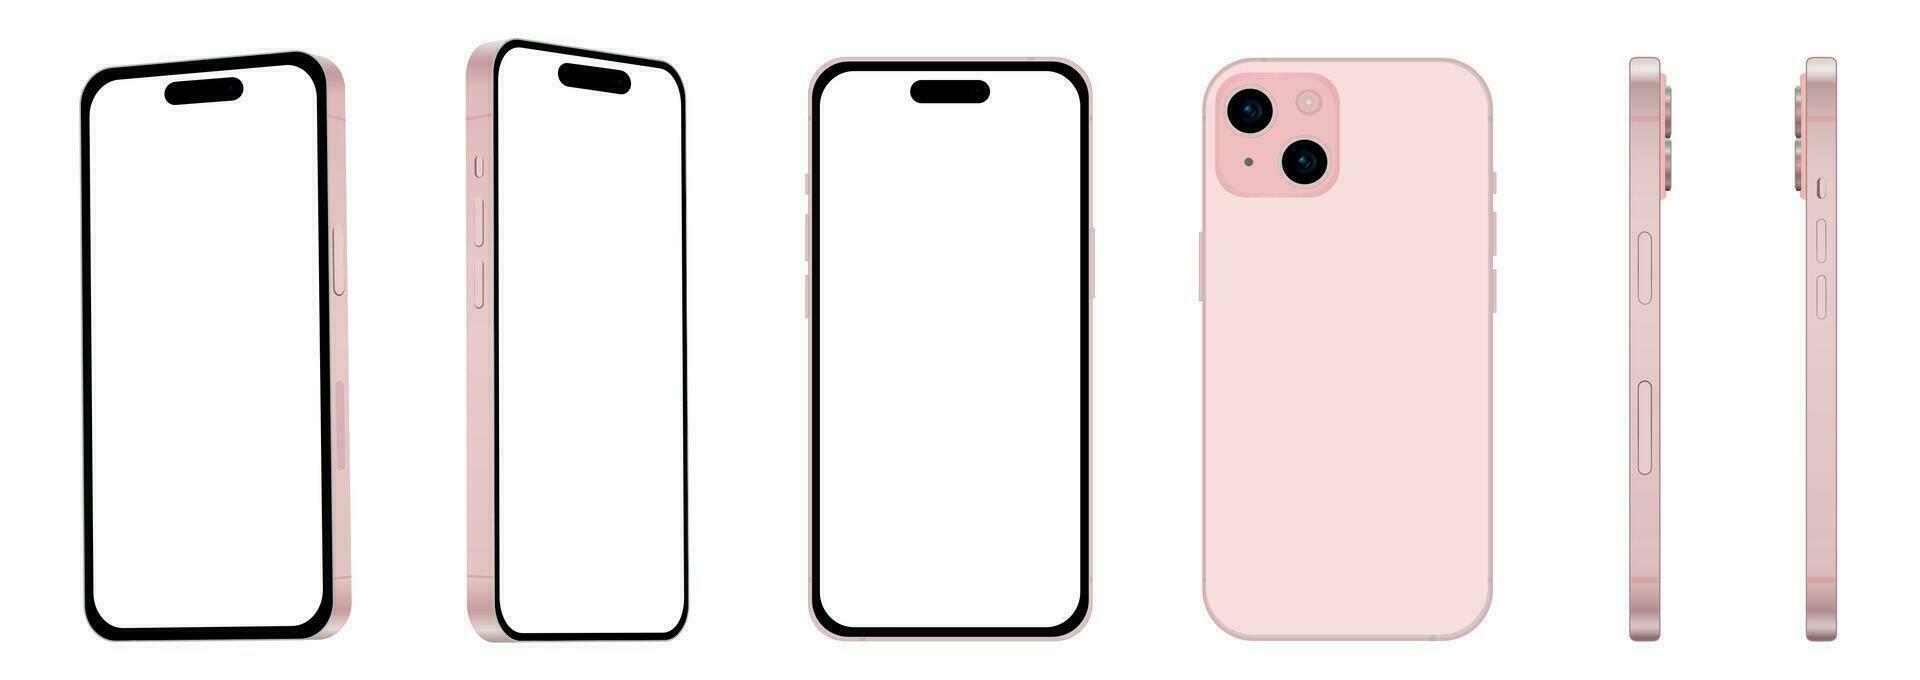 Set of 6 items from different angles, 15 pink smartphone models NEW, mockup for web design on white background vector